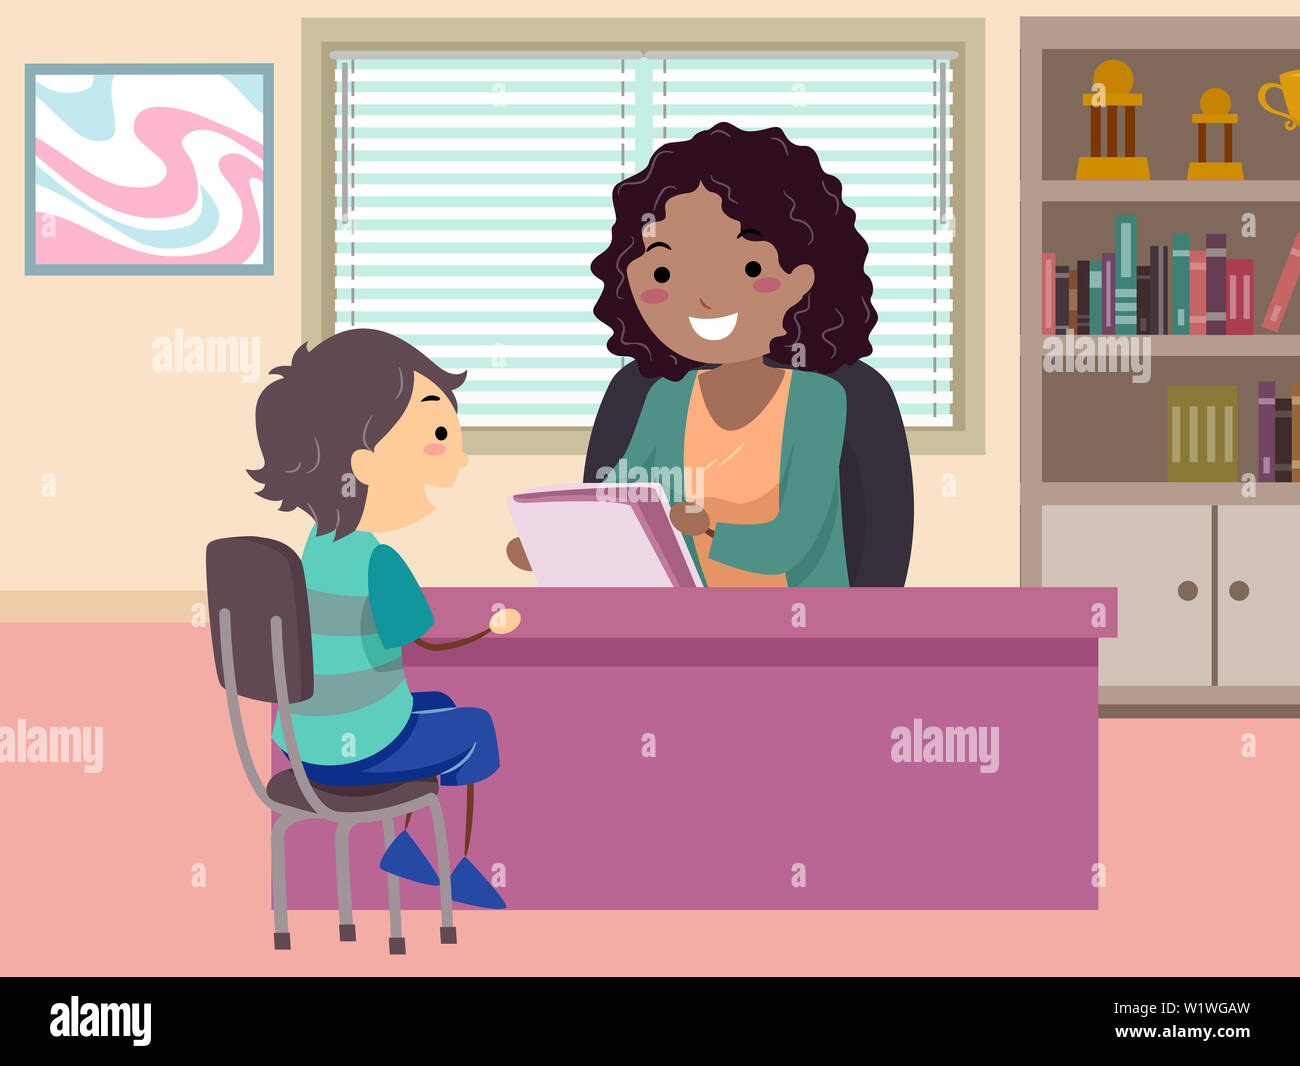 Illustration of a Stickman Kid Boy Student Sitting Down and Talking to the Principal or a Guidance Counselor in an Office Stock Photo